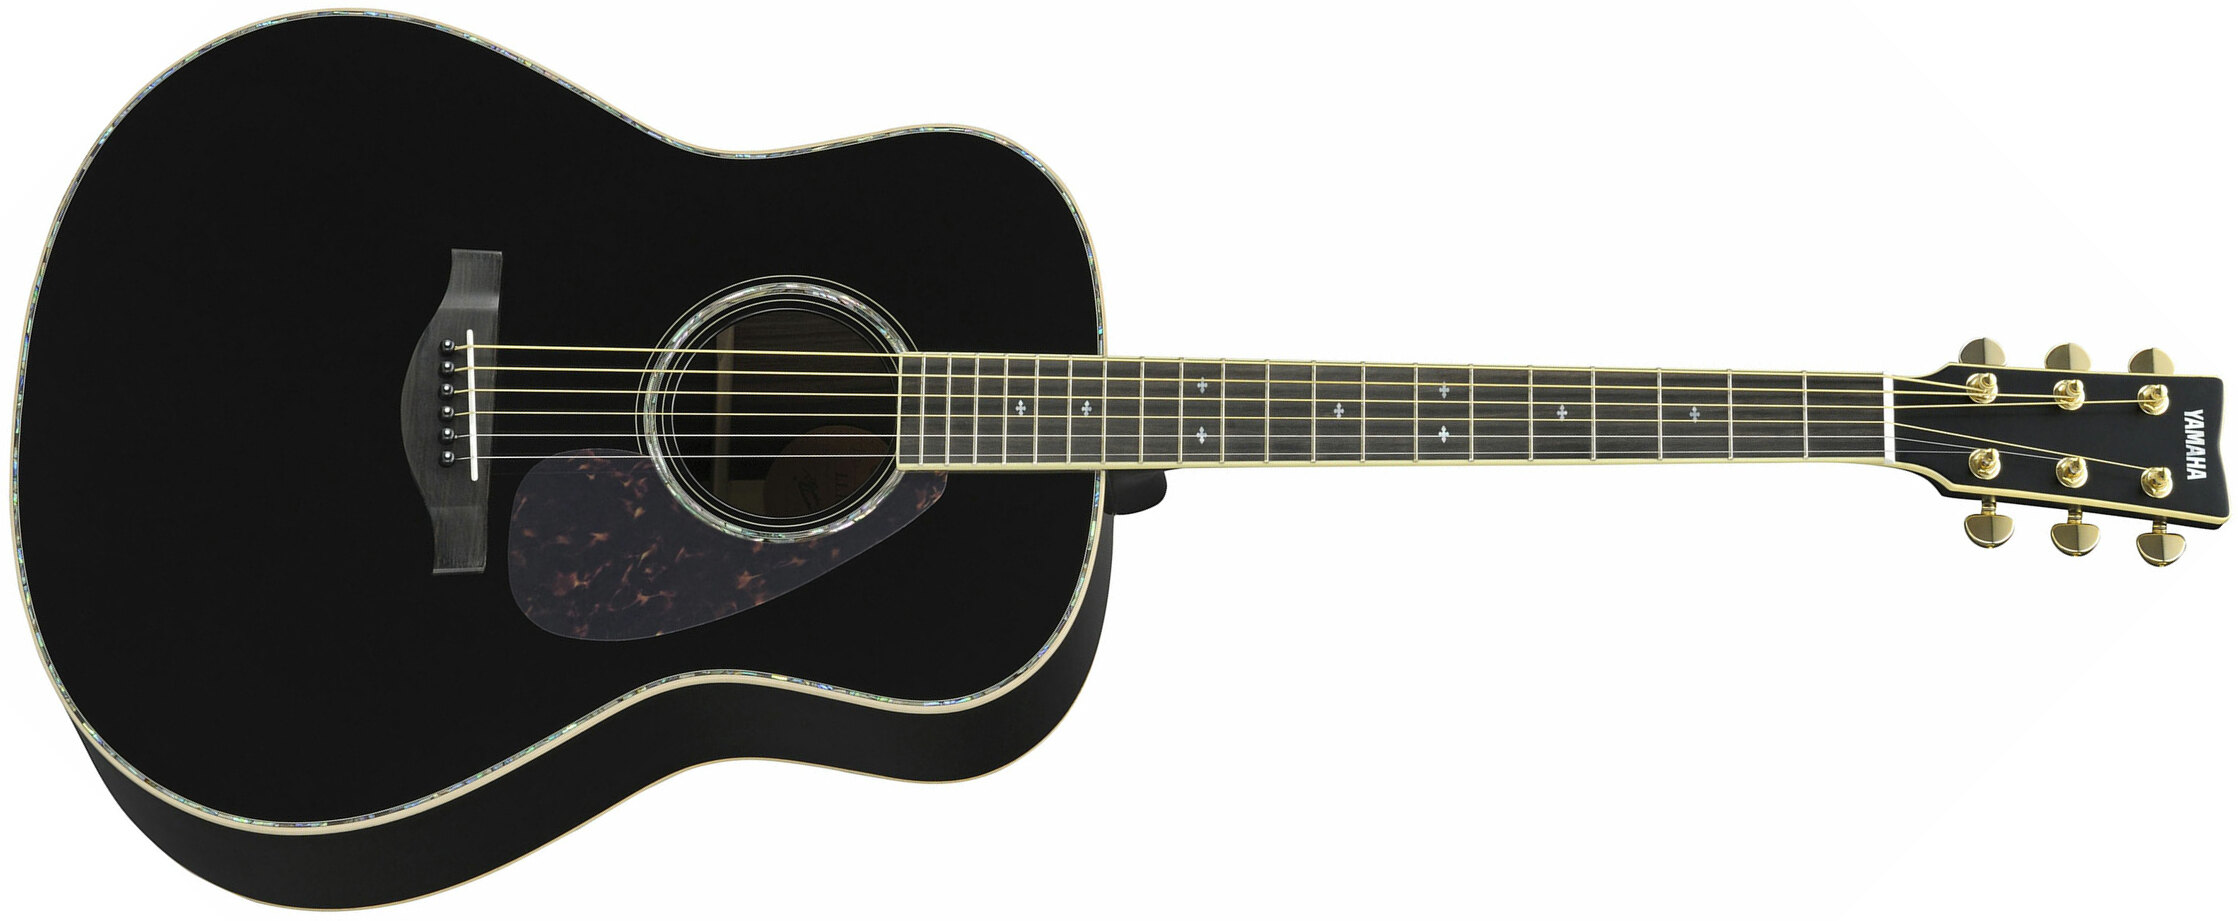 Yamaha Ll16d Are Deluxe Jumbo Epicea Palissandre Eb - Black - Electro acoustic guitar - Main picture